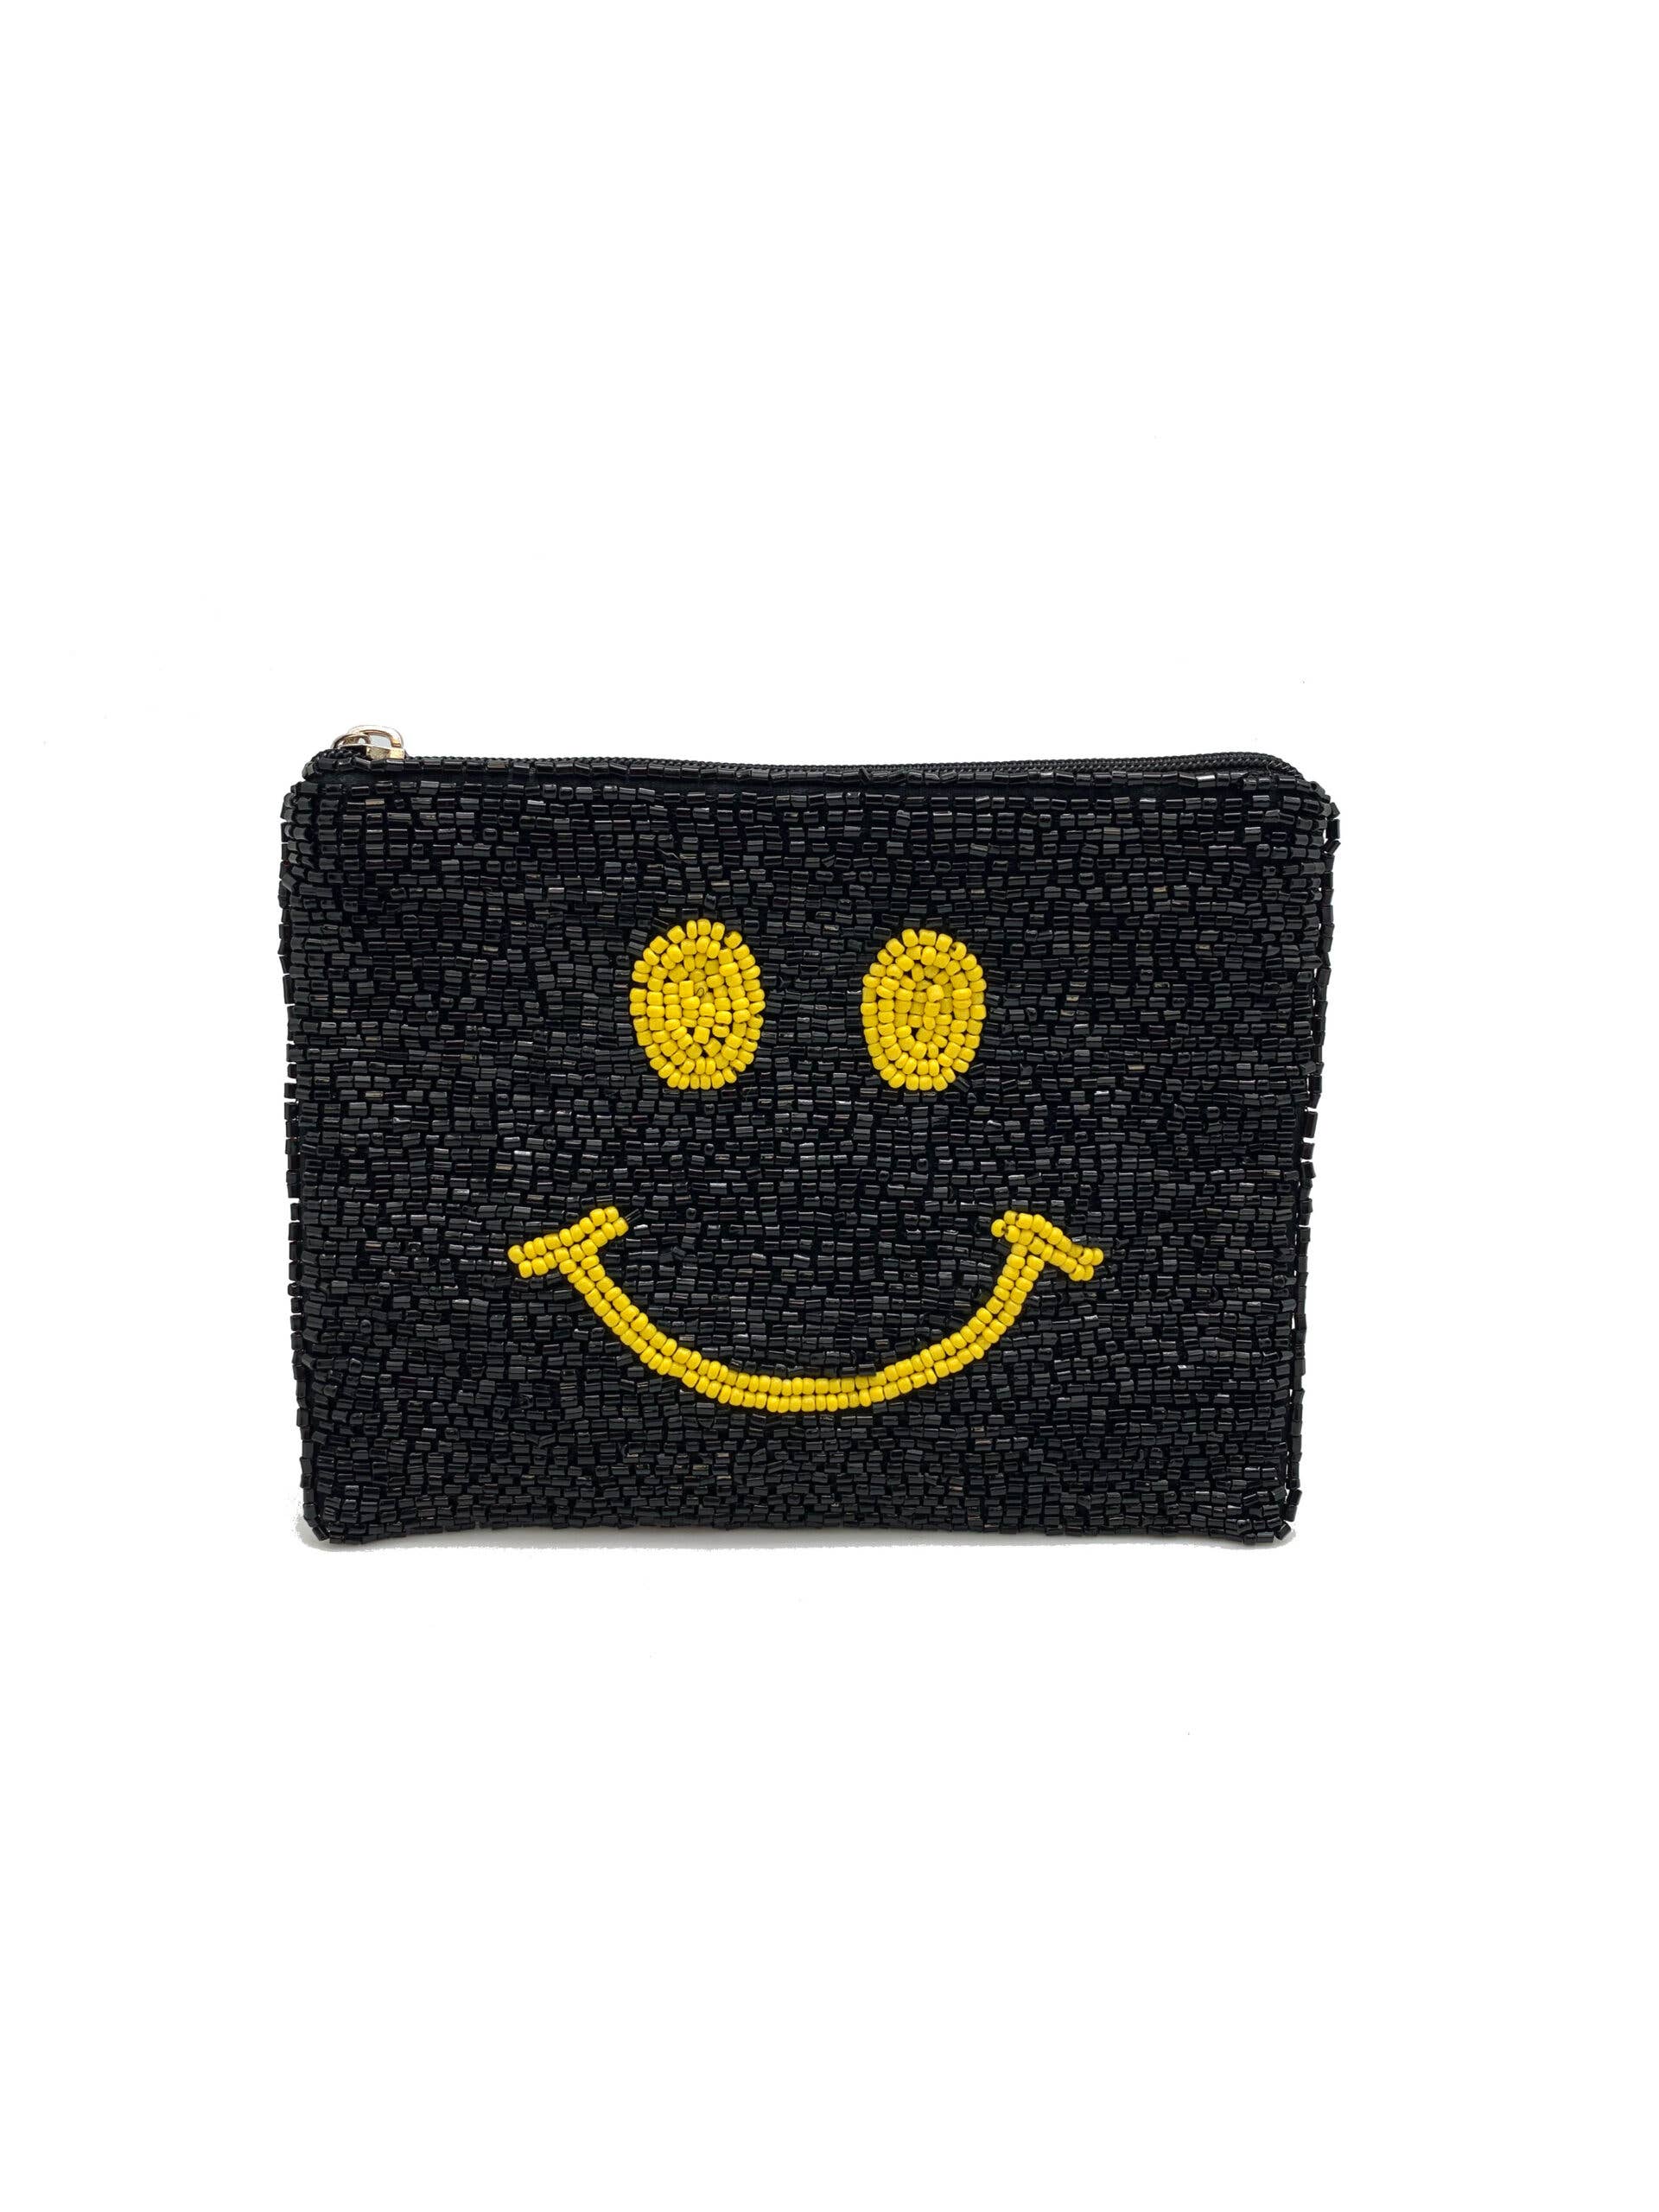 The Bombay Store Beaded Smiley Coin Pouch